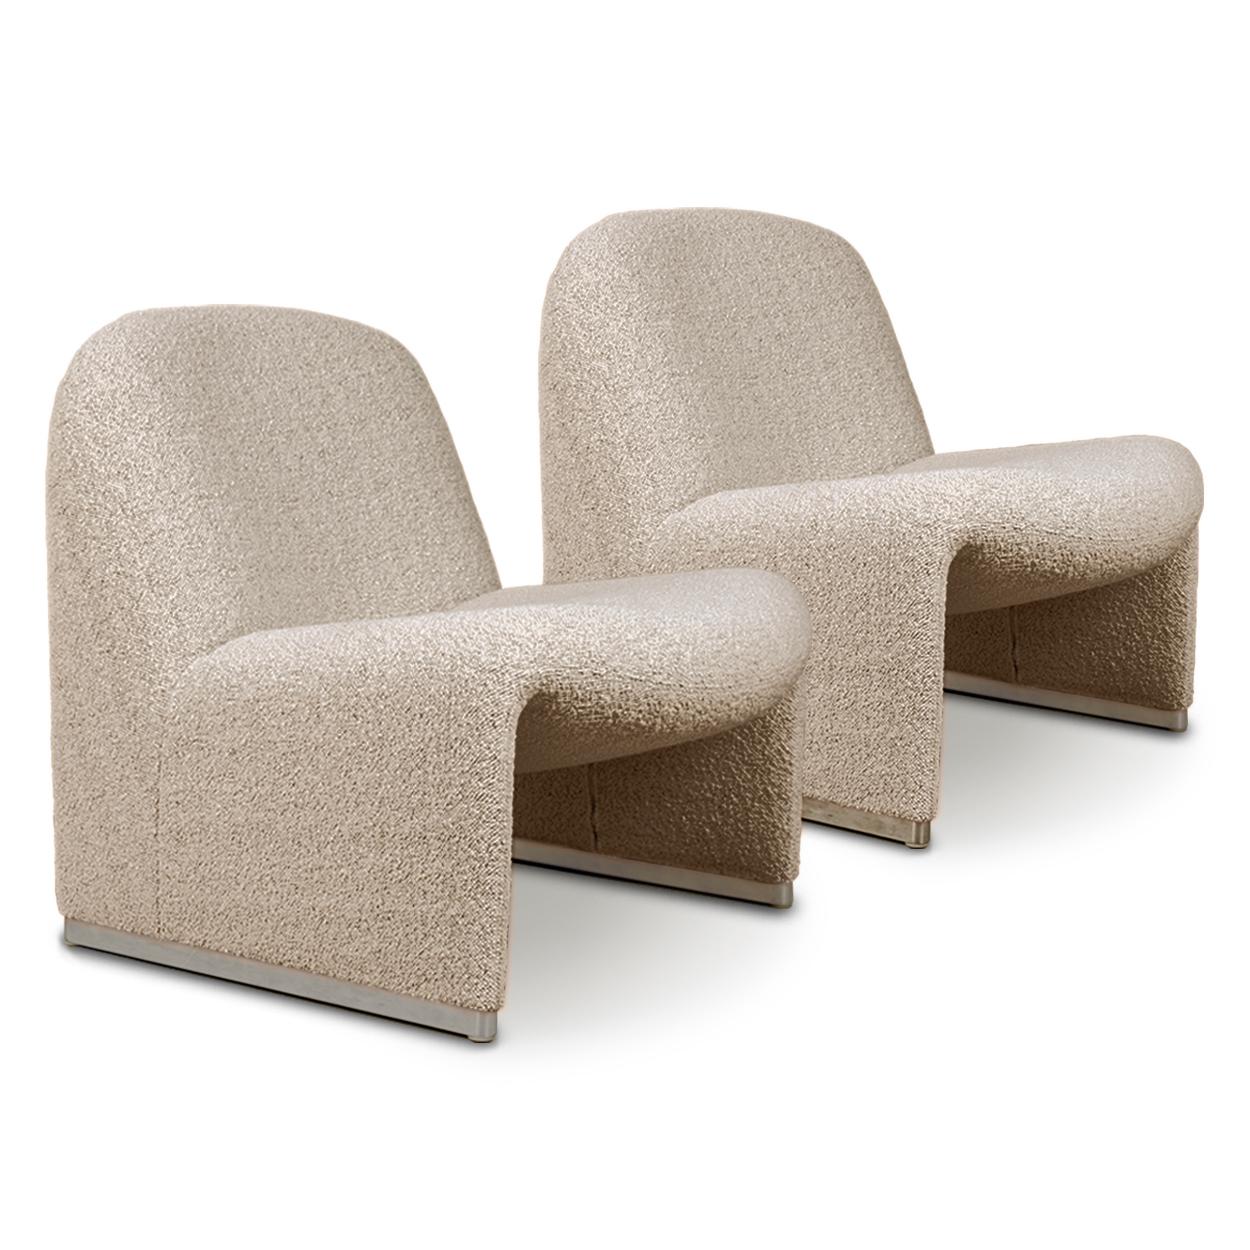 Giancarlo Piretti designed lounge “Alky” chairs newly upholstered in a high-end Bouclé taupe fabric by Dedar, Karakorum 008- (42% wool, 33% viscose) 24% cotton. Aluminum frame and polished chrome foot rests. Beautiful organic curves reminiscent of